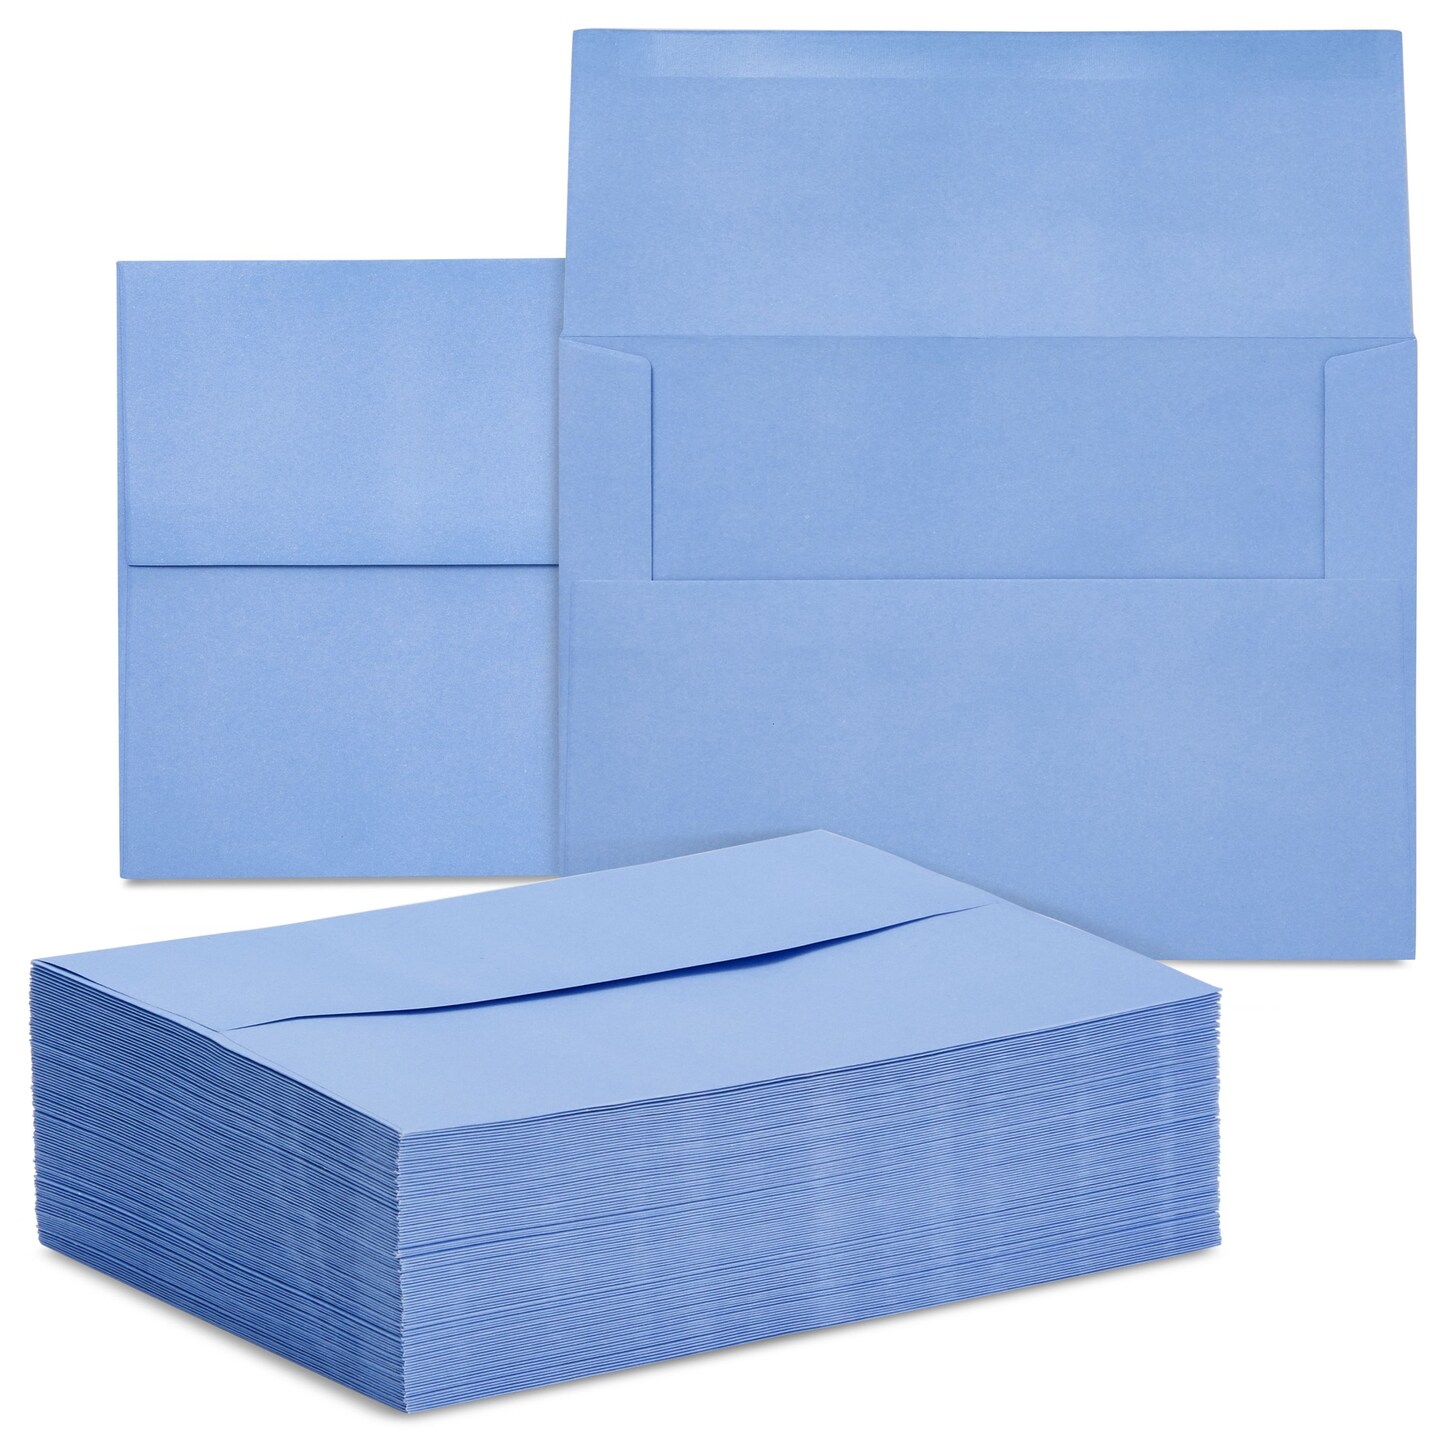 Wholesale 5x7 blank greeting cards envelopes For Many Packaging Needs 